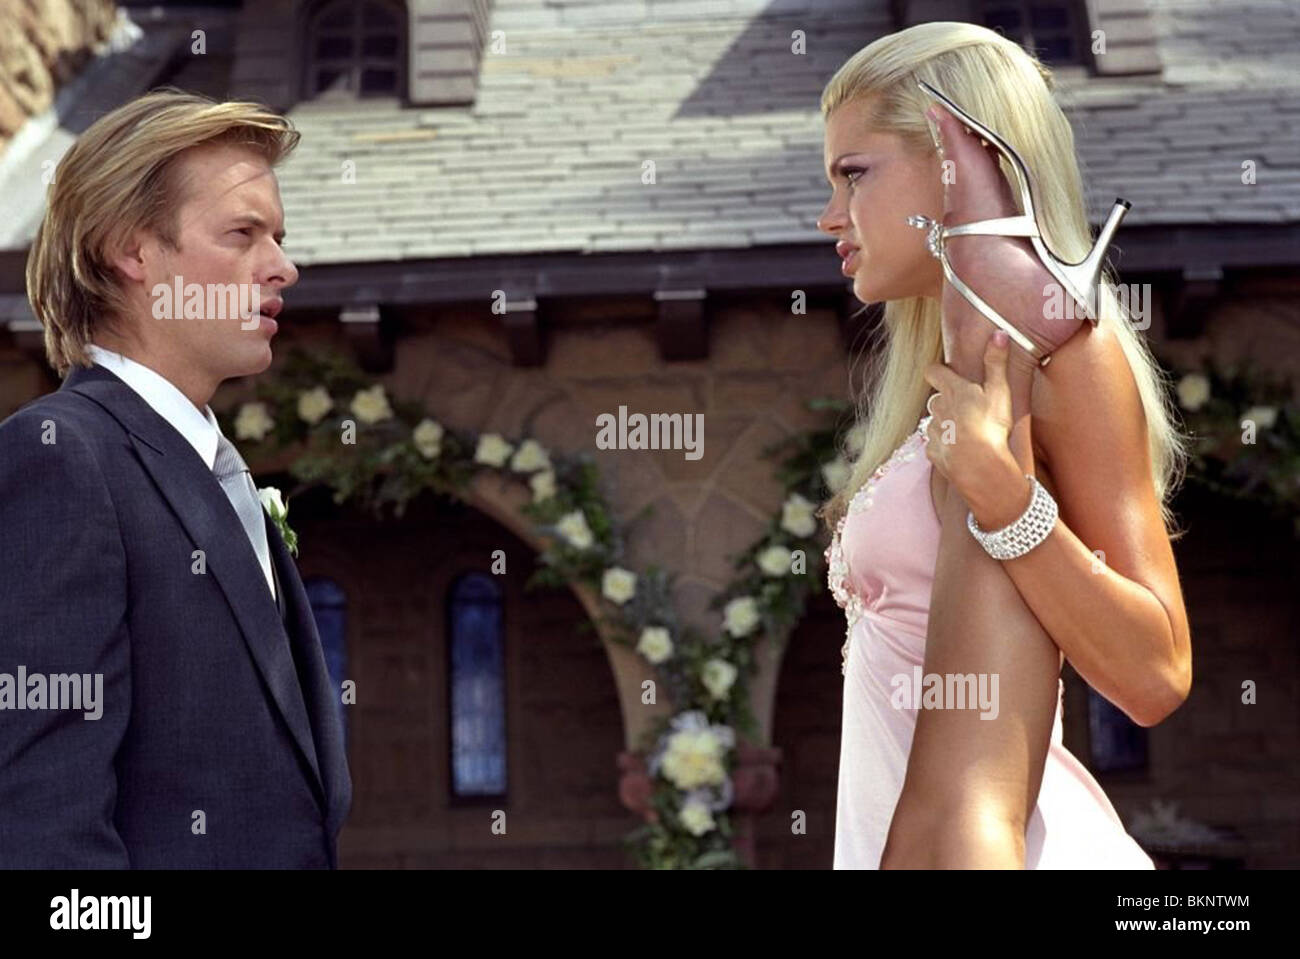 DATE MOVIE (2006), ADAM CAMPBELL, SOPHIE MONK DATE 001-11 Banque D'Images